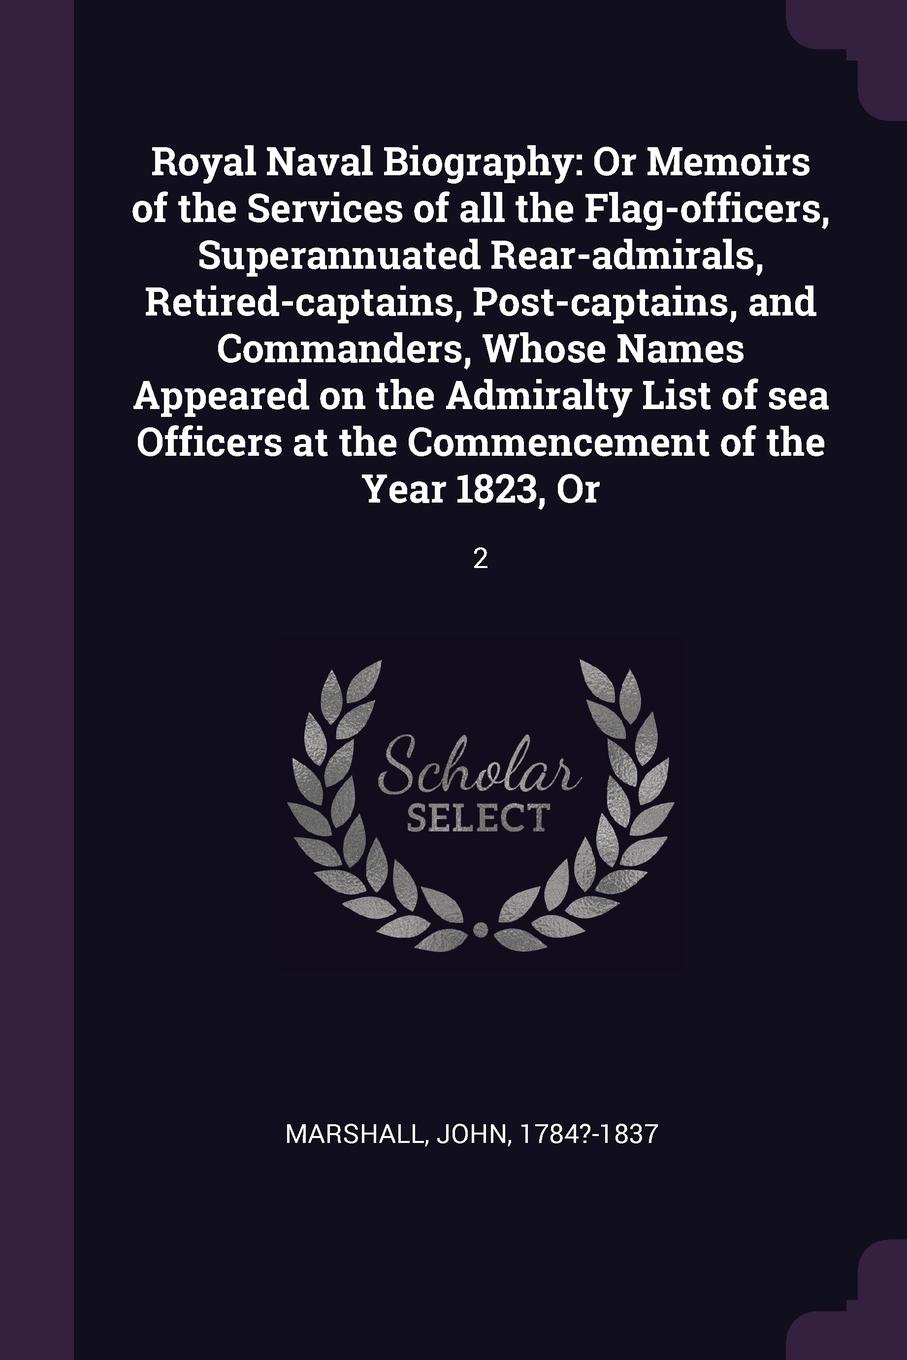 Royal Naval Biography. Or Memoirs of the Services of all the Flag-officers, Superannuated Rear-admirals, Retired-captains, Post-captains, and Commanders, Whose Names Appeared on the Admiralty List of sea Officers at the Commencement of the Year 18...